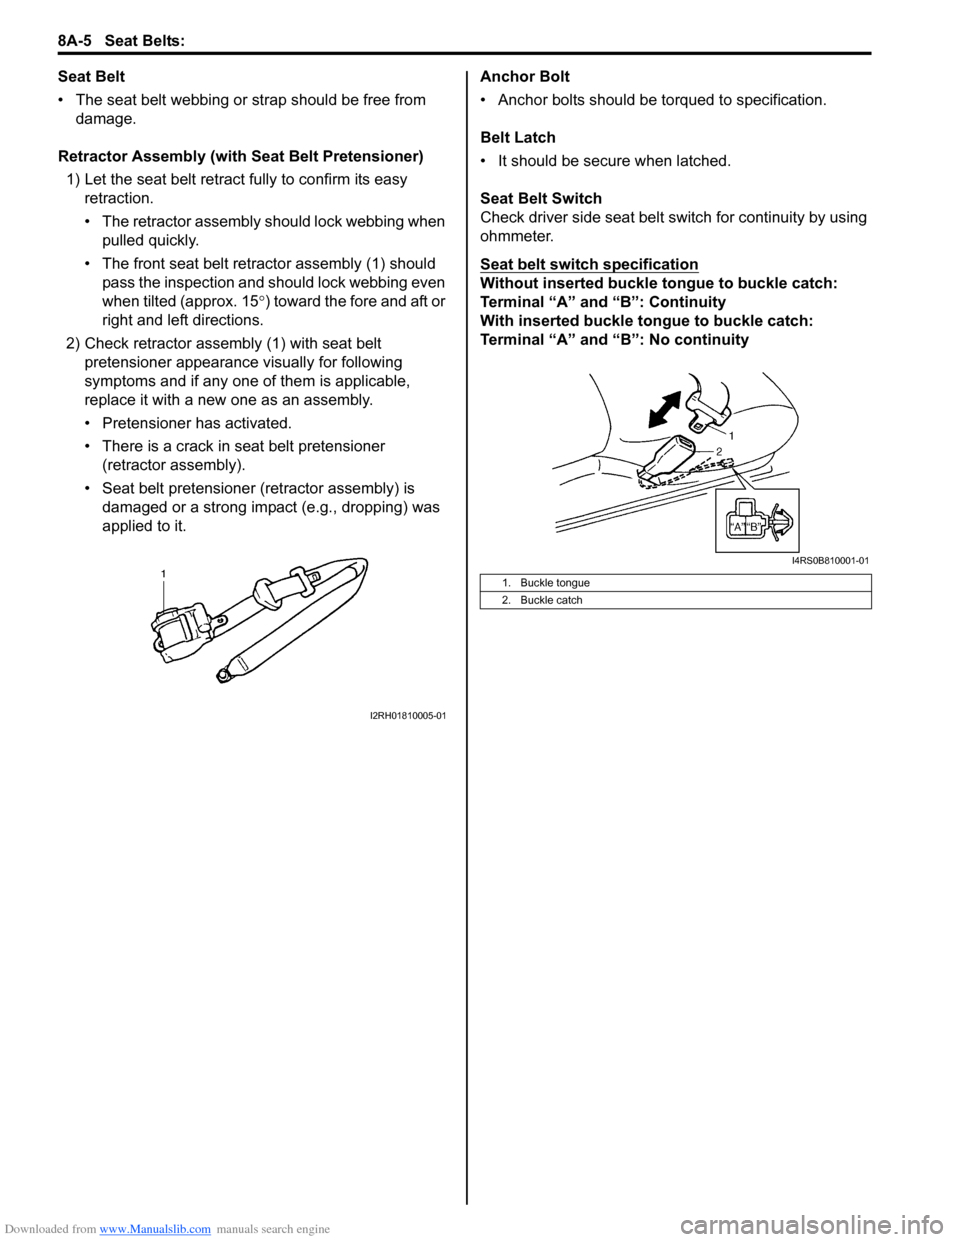 SUZUKI SWIFT 2007 2.G Service Repair Manual Downloaded from www.Manualslib.com manuals search engine 8A-5 Seat Belts: 
Seat Belt
• The seat belt webbing or strap should be free from damage.
Retractor Assembly (with Seat Belt Pretensioner) 1) 